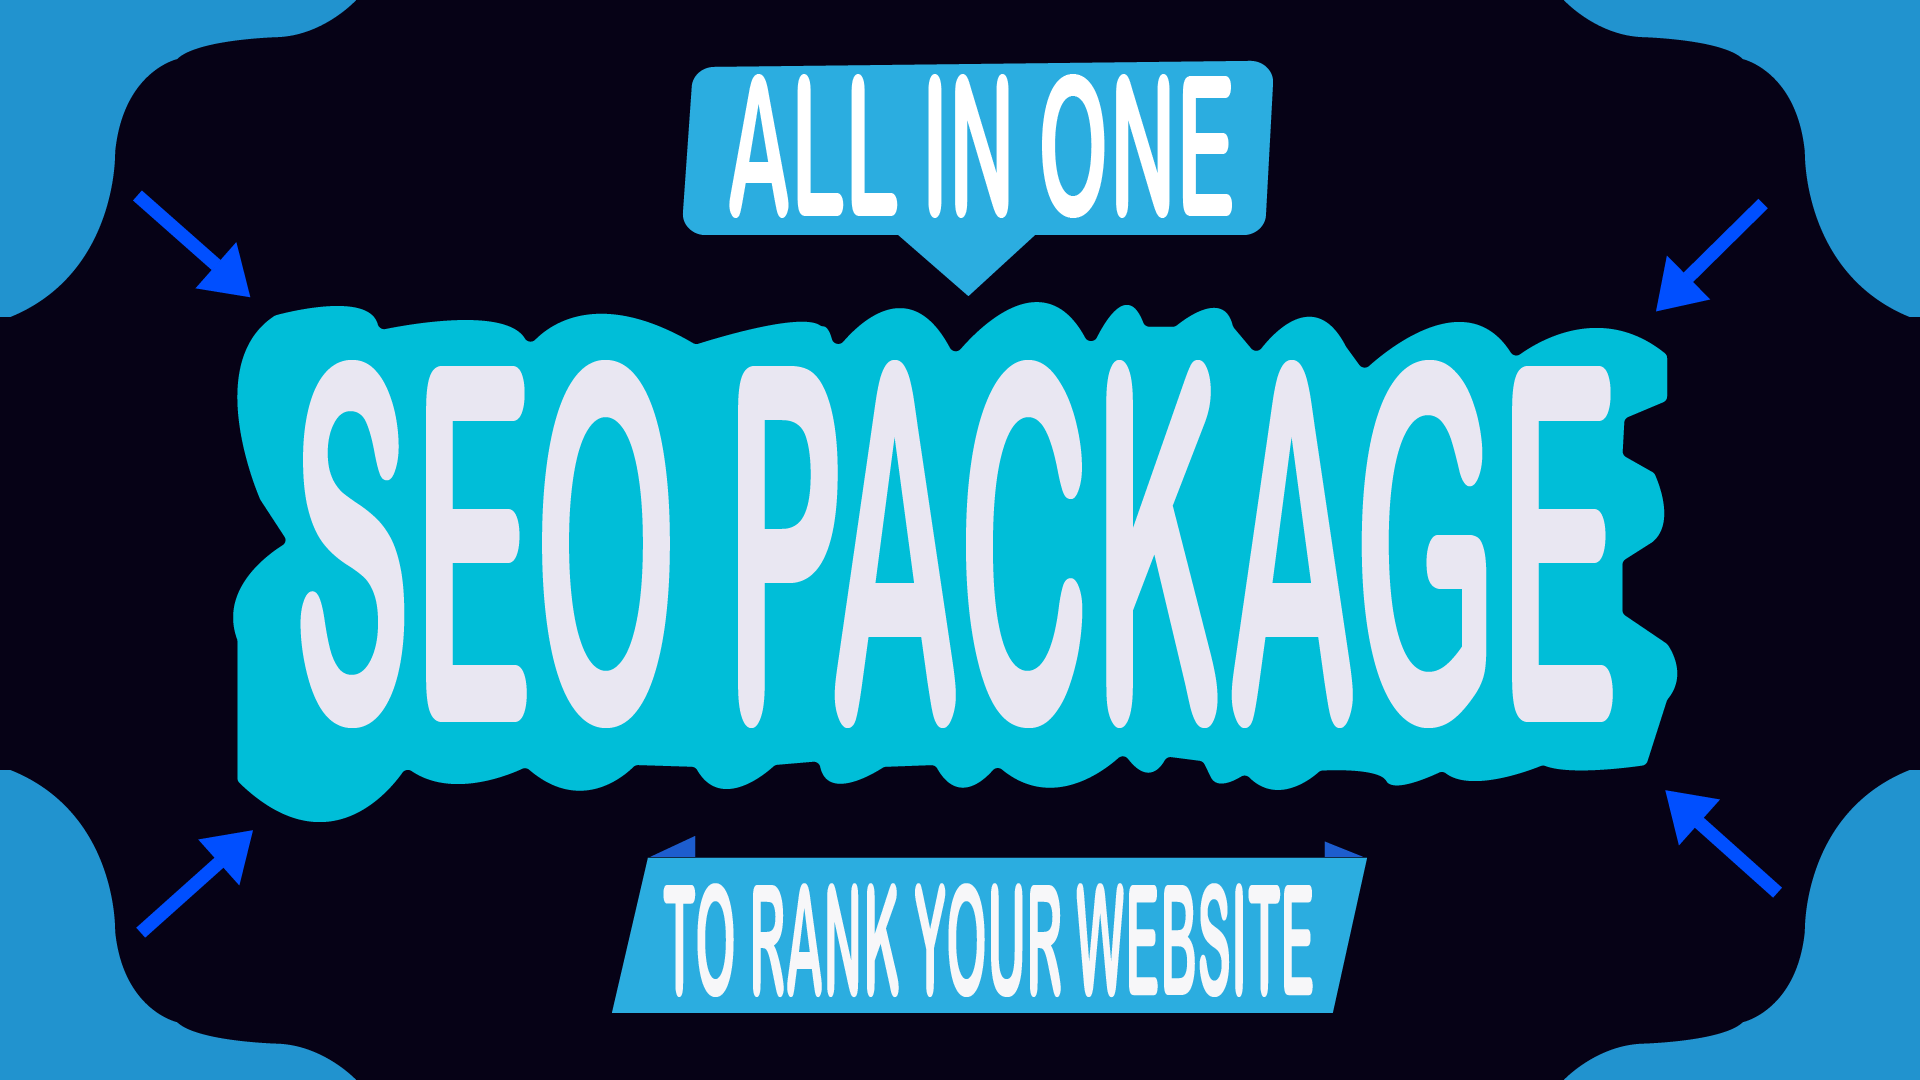 Ranking You Website With All In One SEO Package